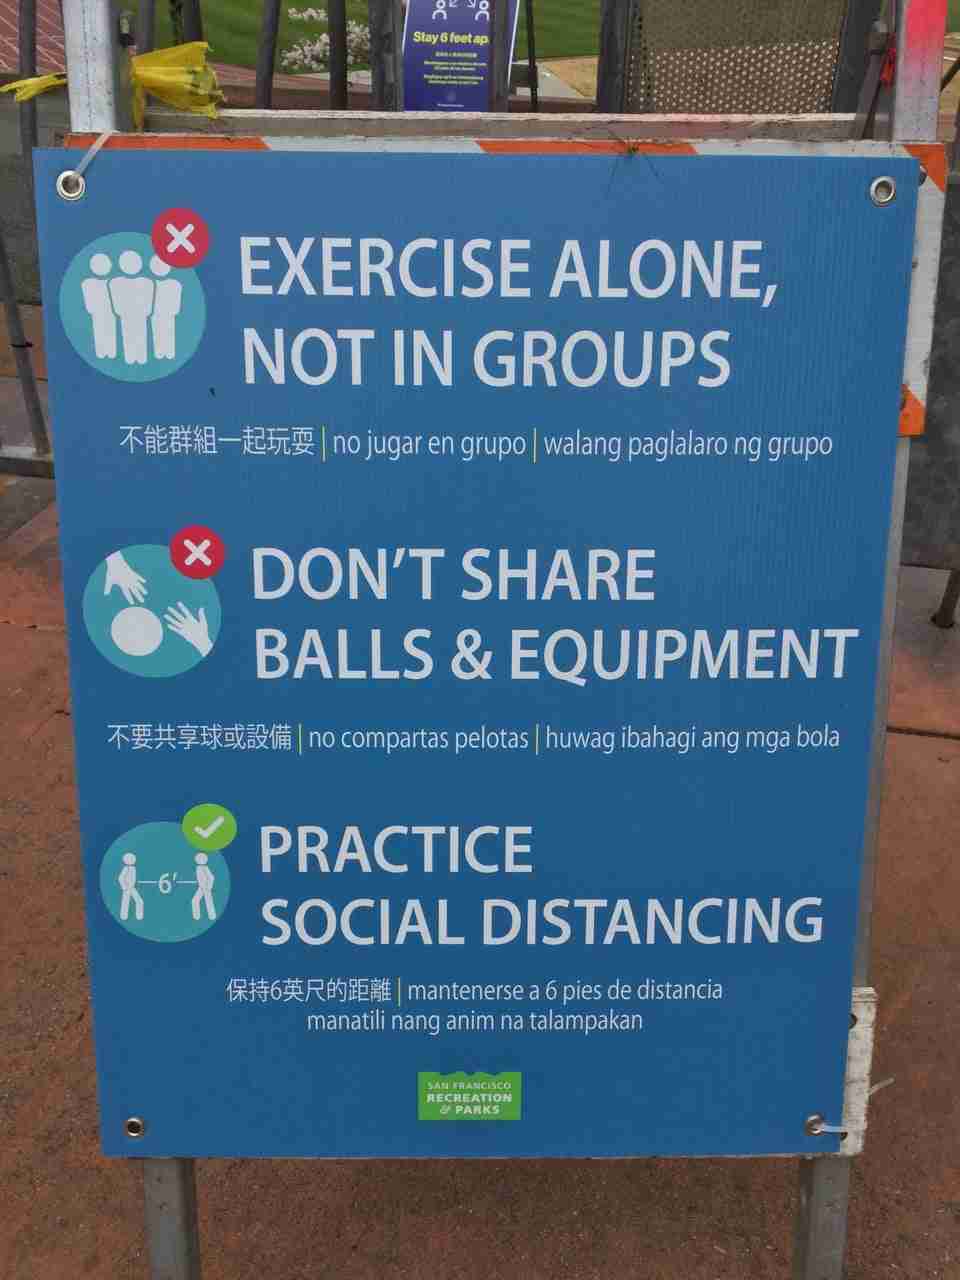 Close-up of a sign with three statements, each translated into Chinese, Spanish, and Filipino, stating “EXERCISE ALONE, NOT IN GROUPS”, “DON’T SHARE BALLS & EQUIPMENT”, and “PRACTICE SOCIAL DISTANCING”, below those a small San Francisco Recreation & Parks logo.